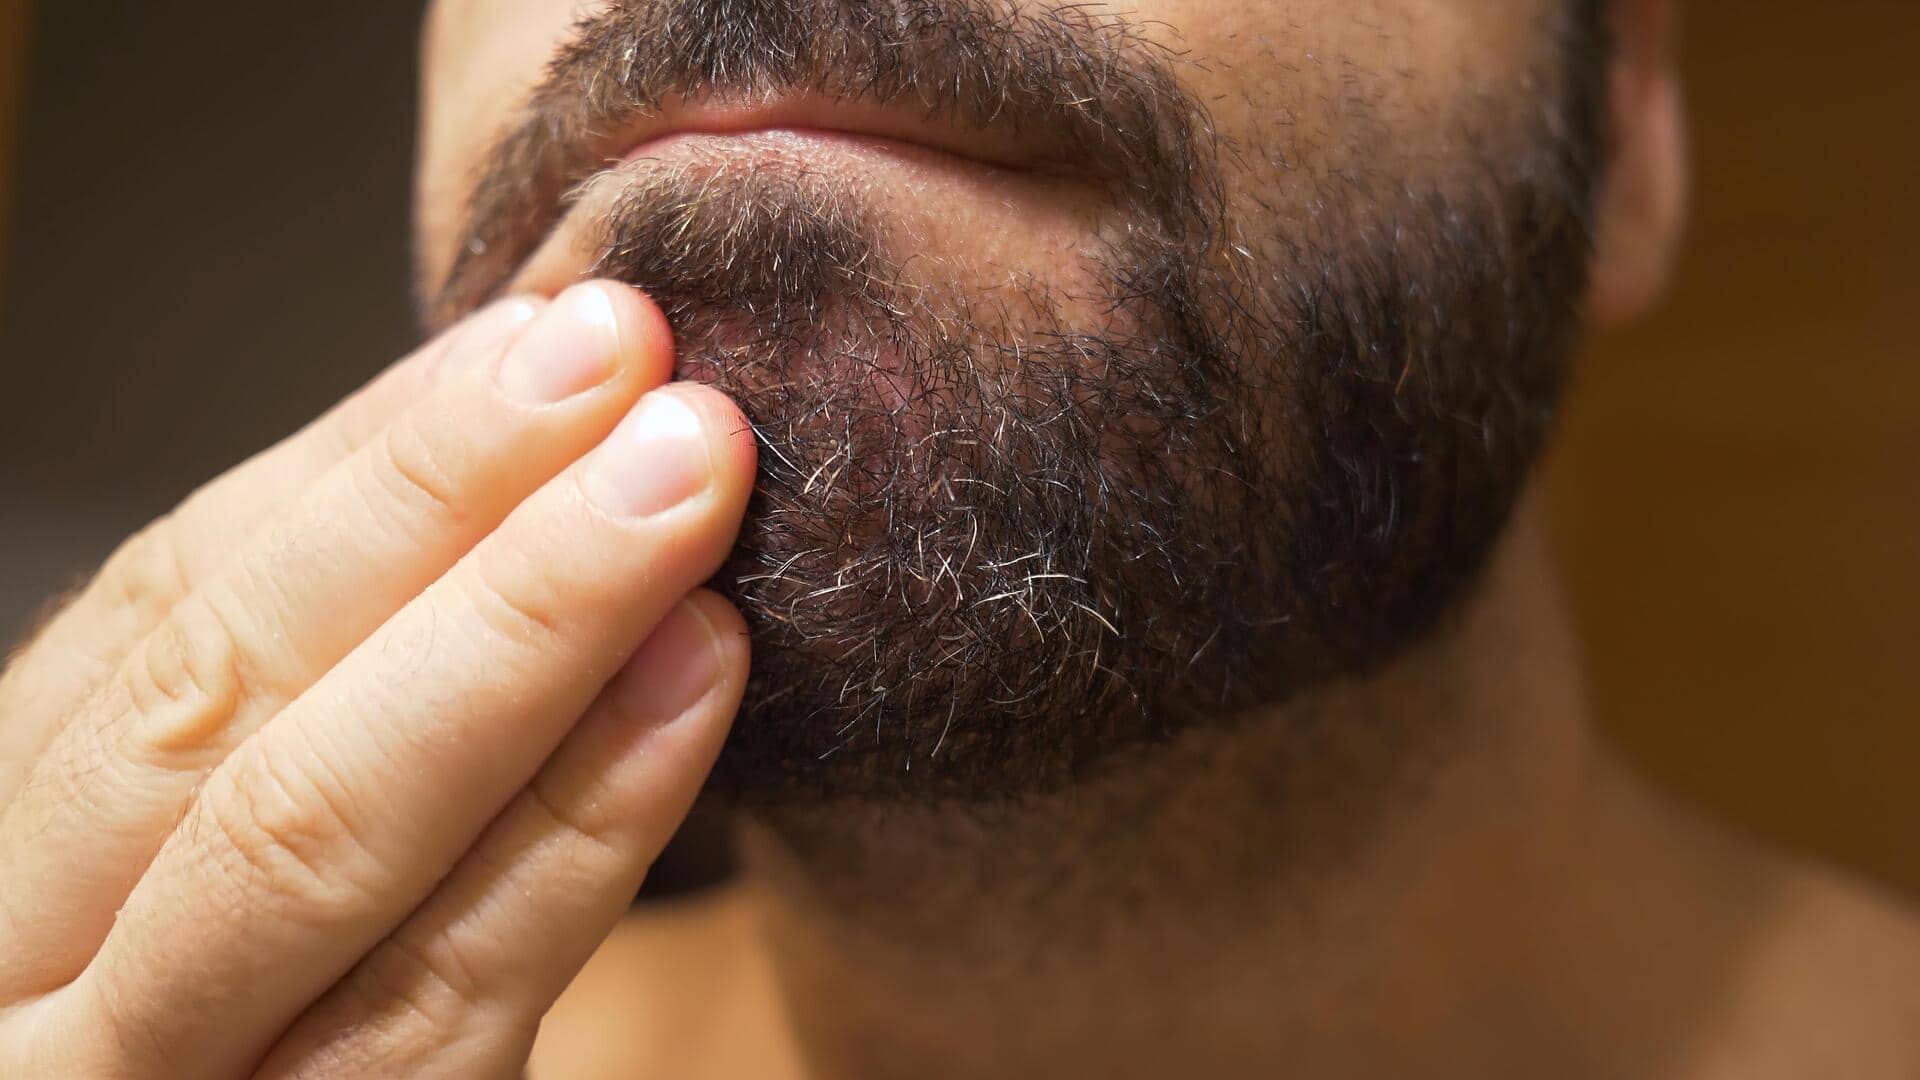 Try these home remedies to get rid of beard dandruff